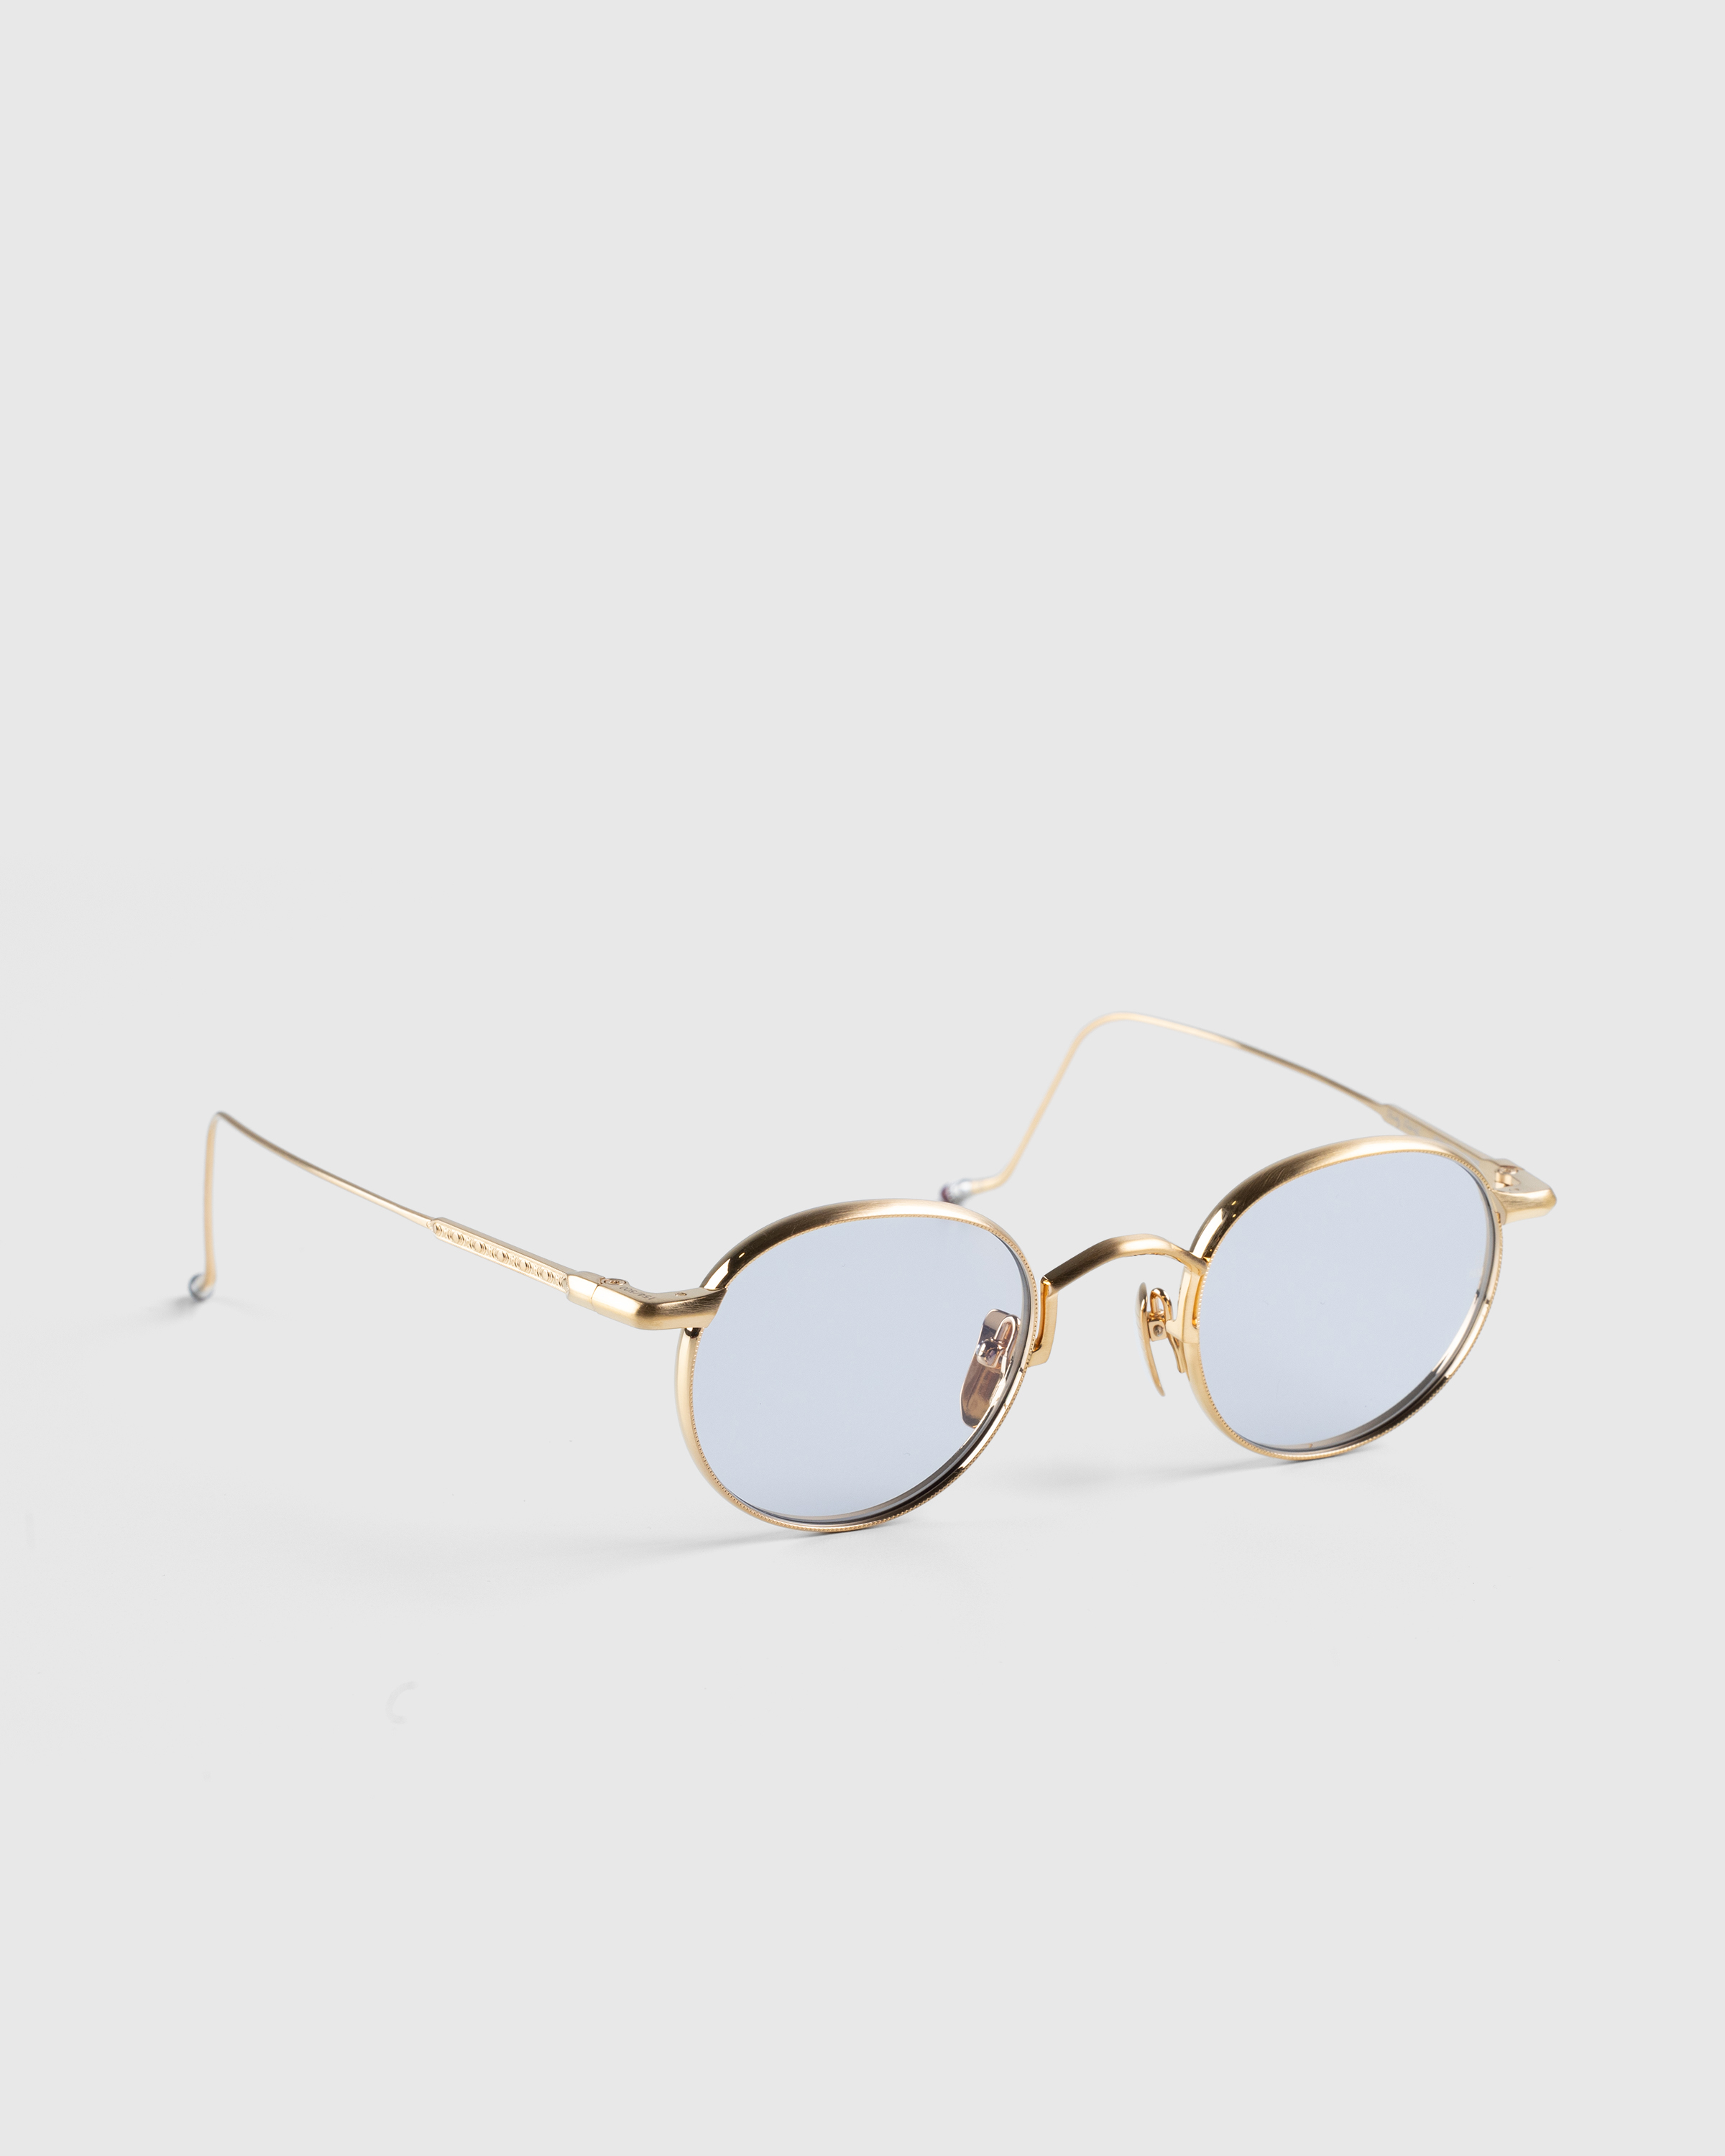 Jacques Marie Mage – Full Metal Jacket Gold - Sunglasses - Gold - Image 3